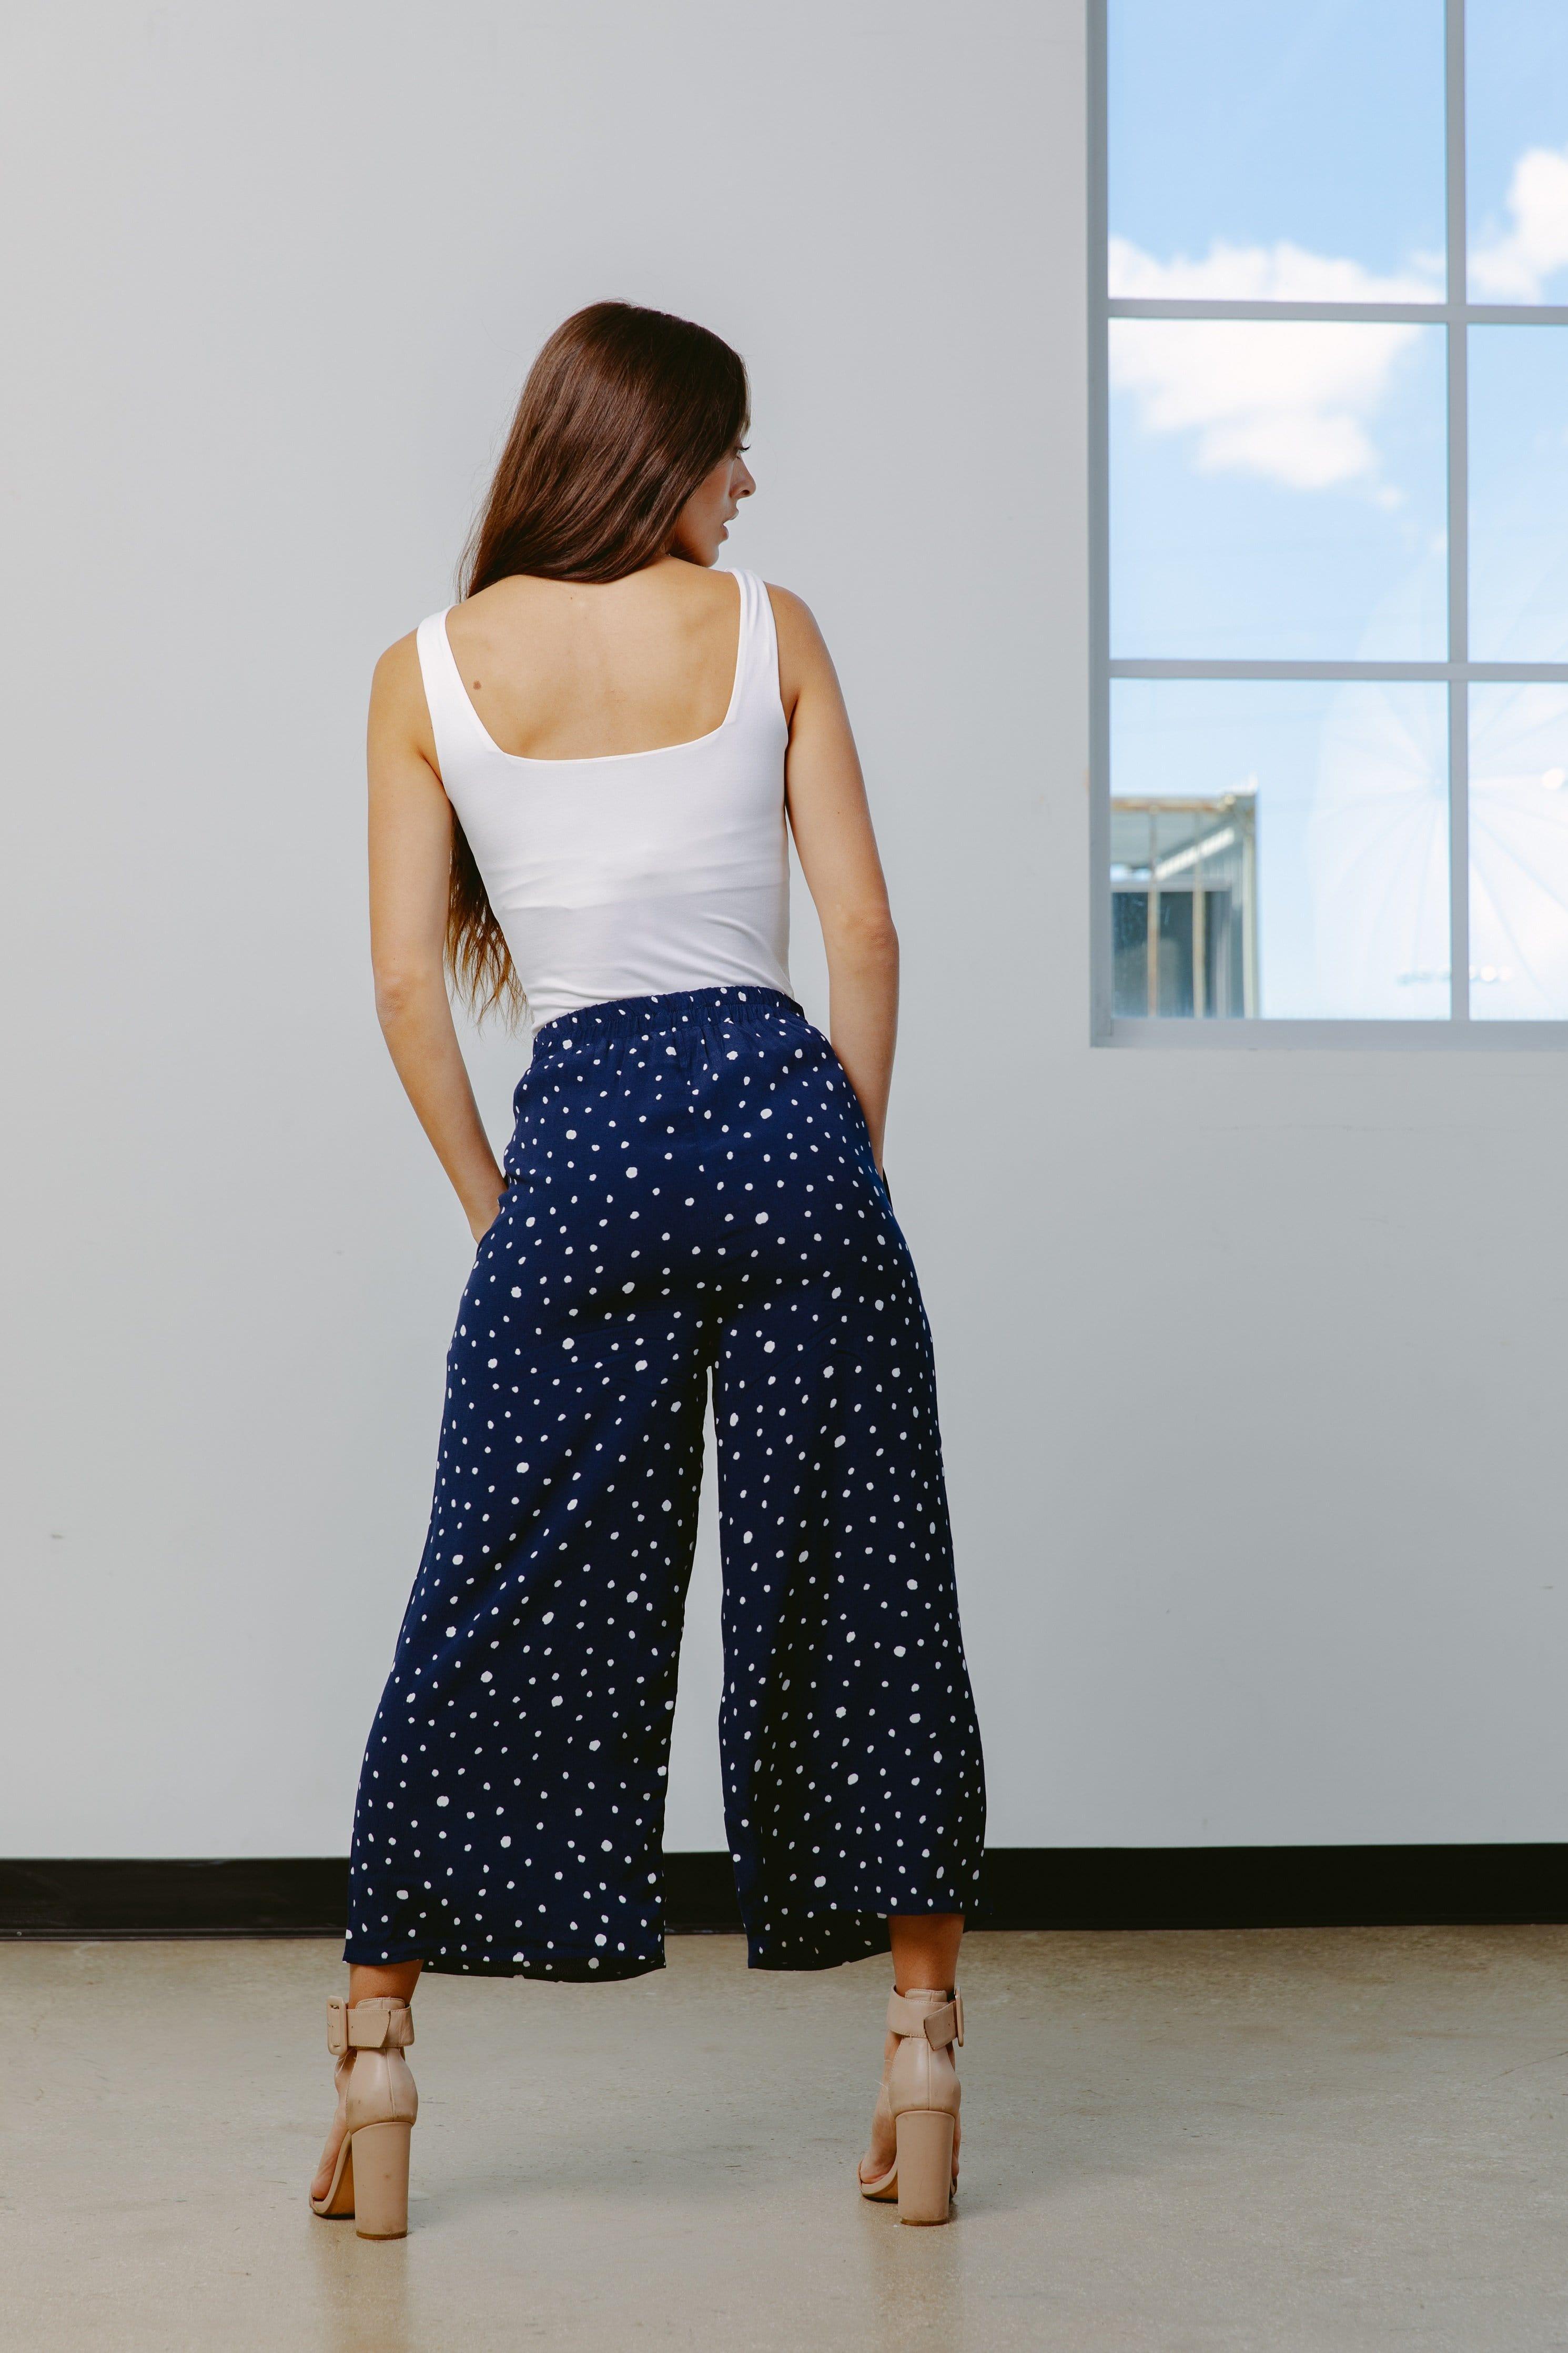 On The Dot Printed Navy Pants - Lovely Brielle